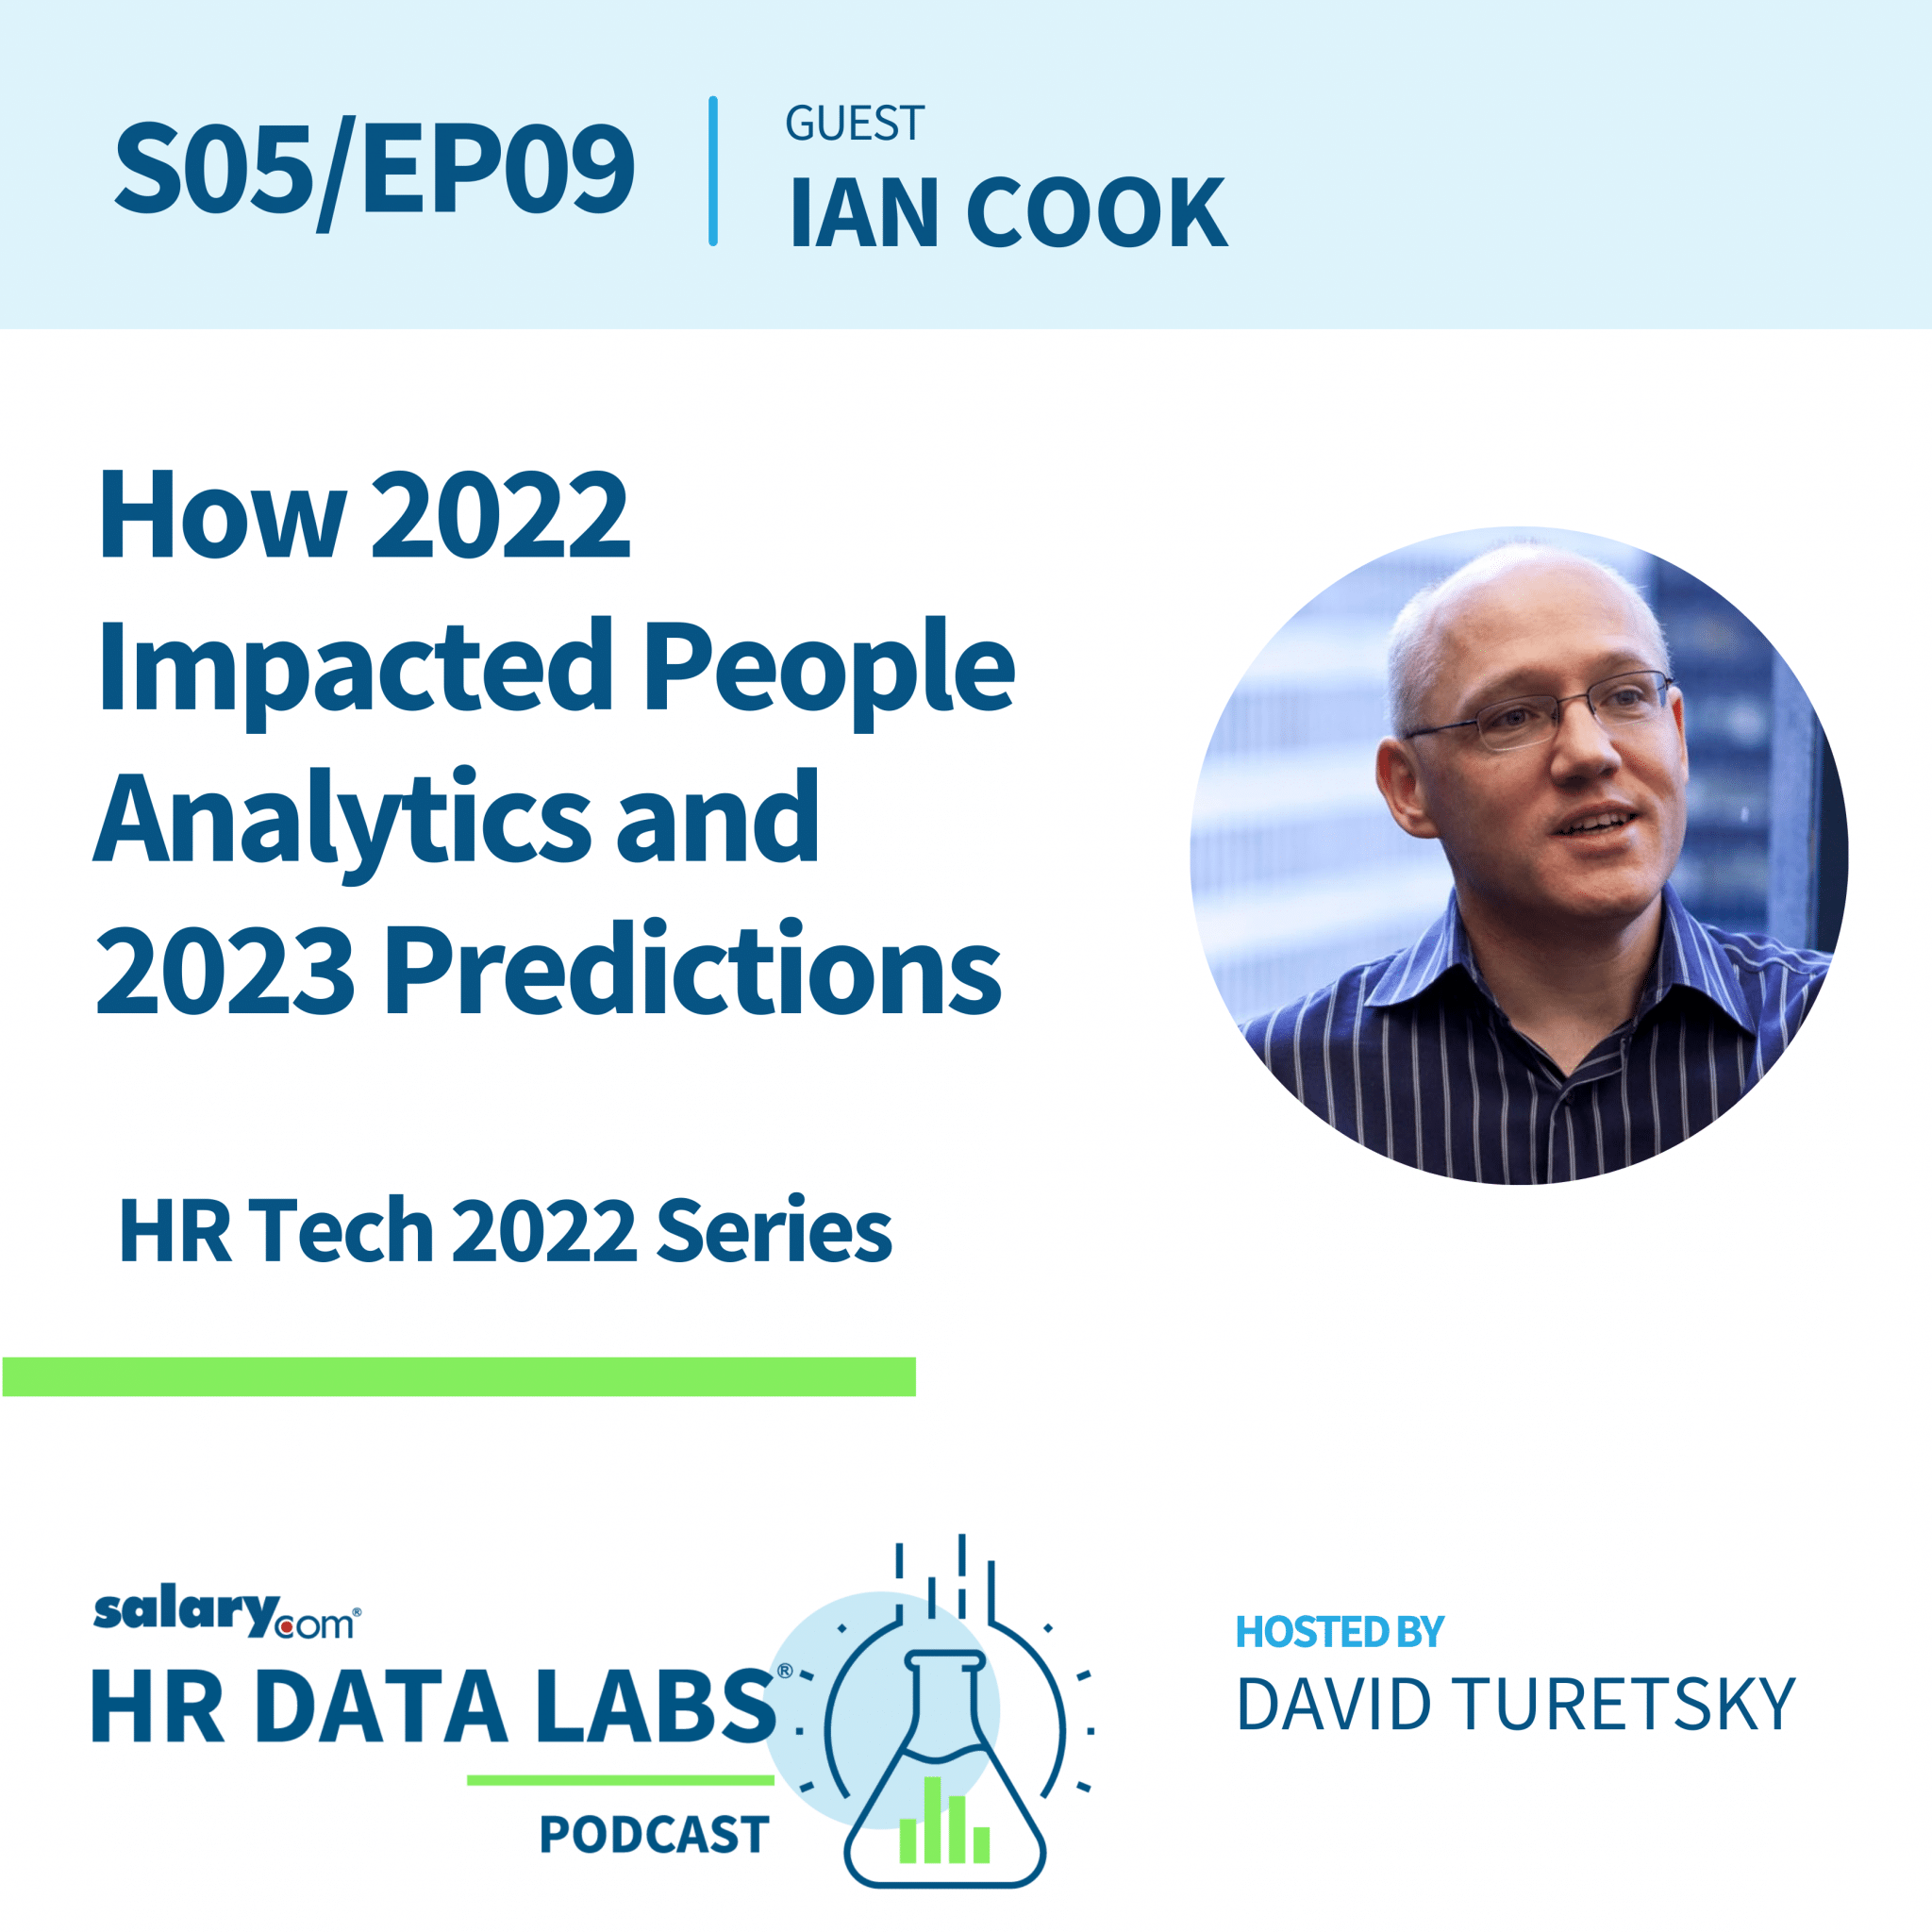 Ian Cook – HR Tech 2022 Series – How 2022 Impacted People Analytics and 2023 Predictions